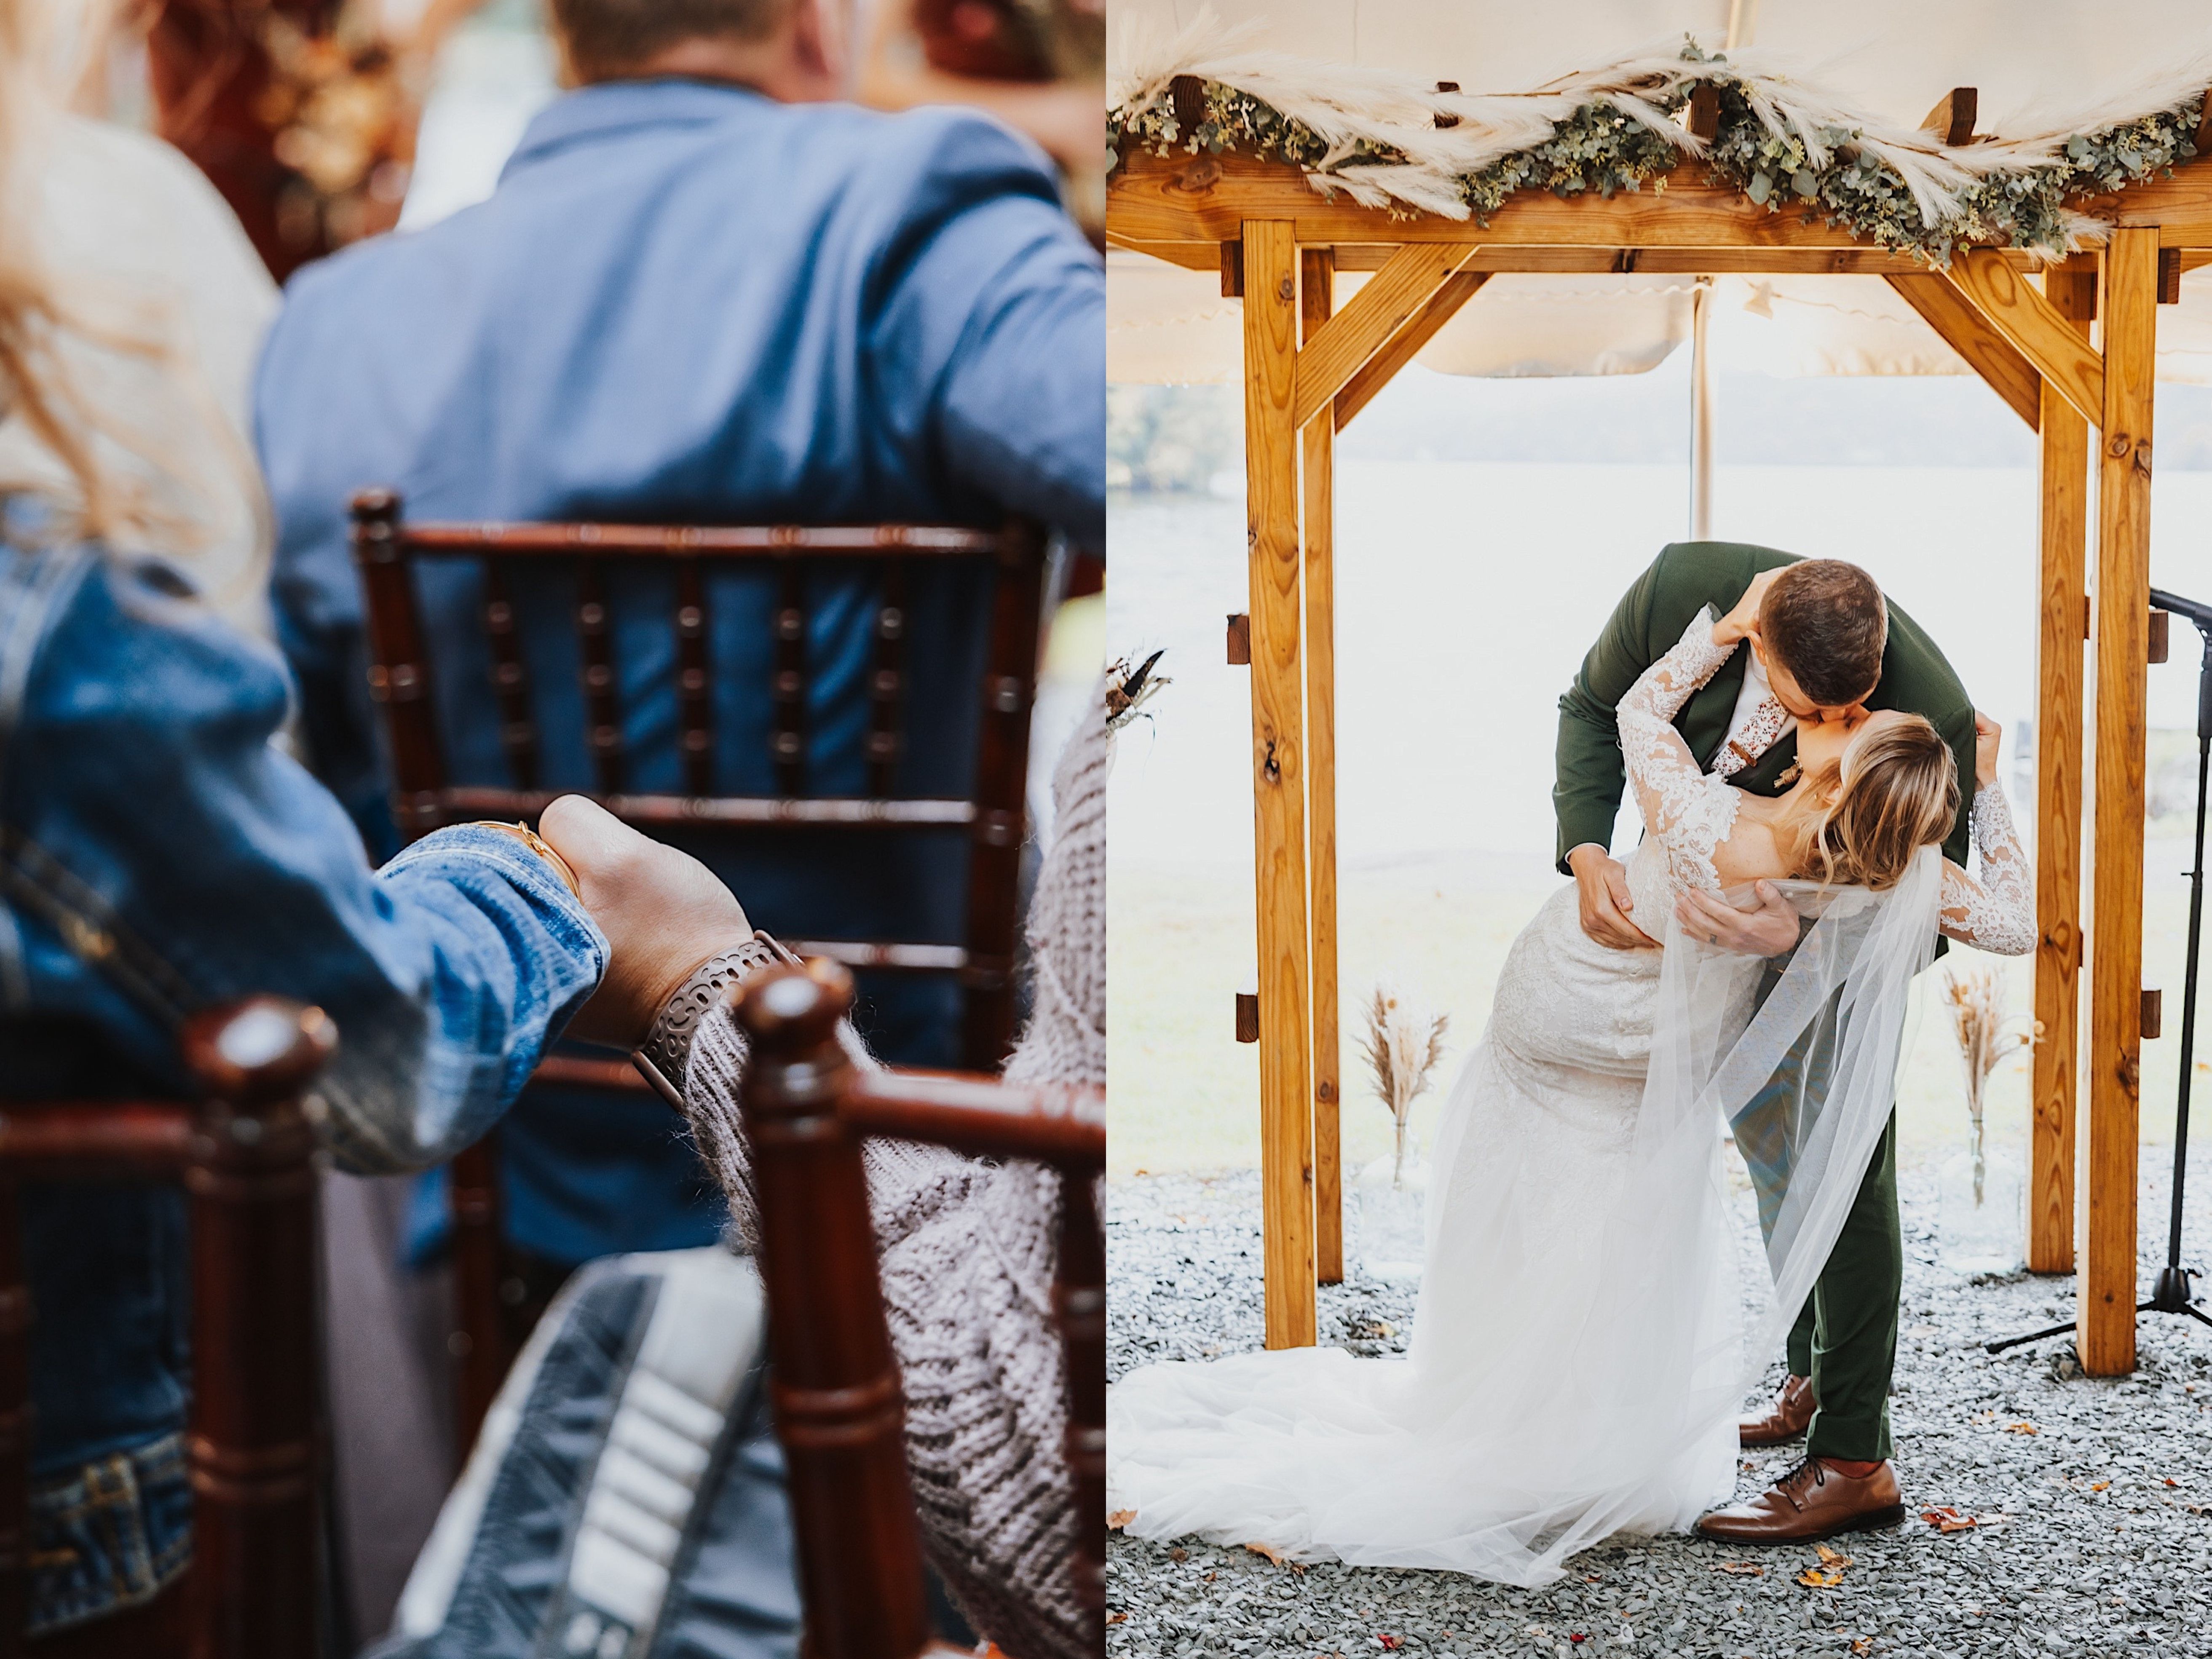 2 photos side by side, the left is a close up photo of two guests of a wedding ceremony holding hands, the right is of a bride and groom kissing during their wedding ceremony